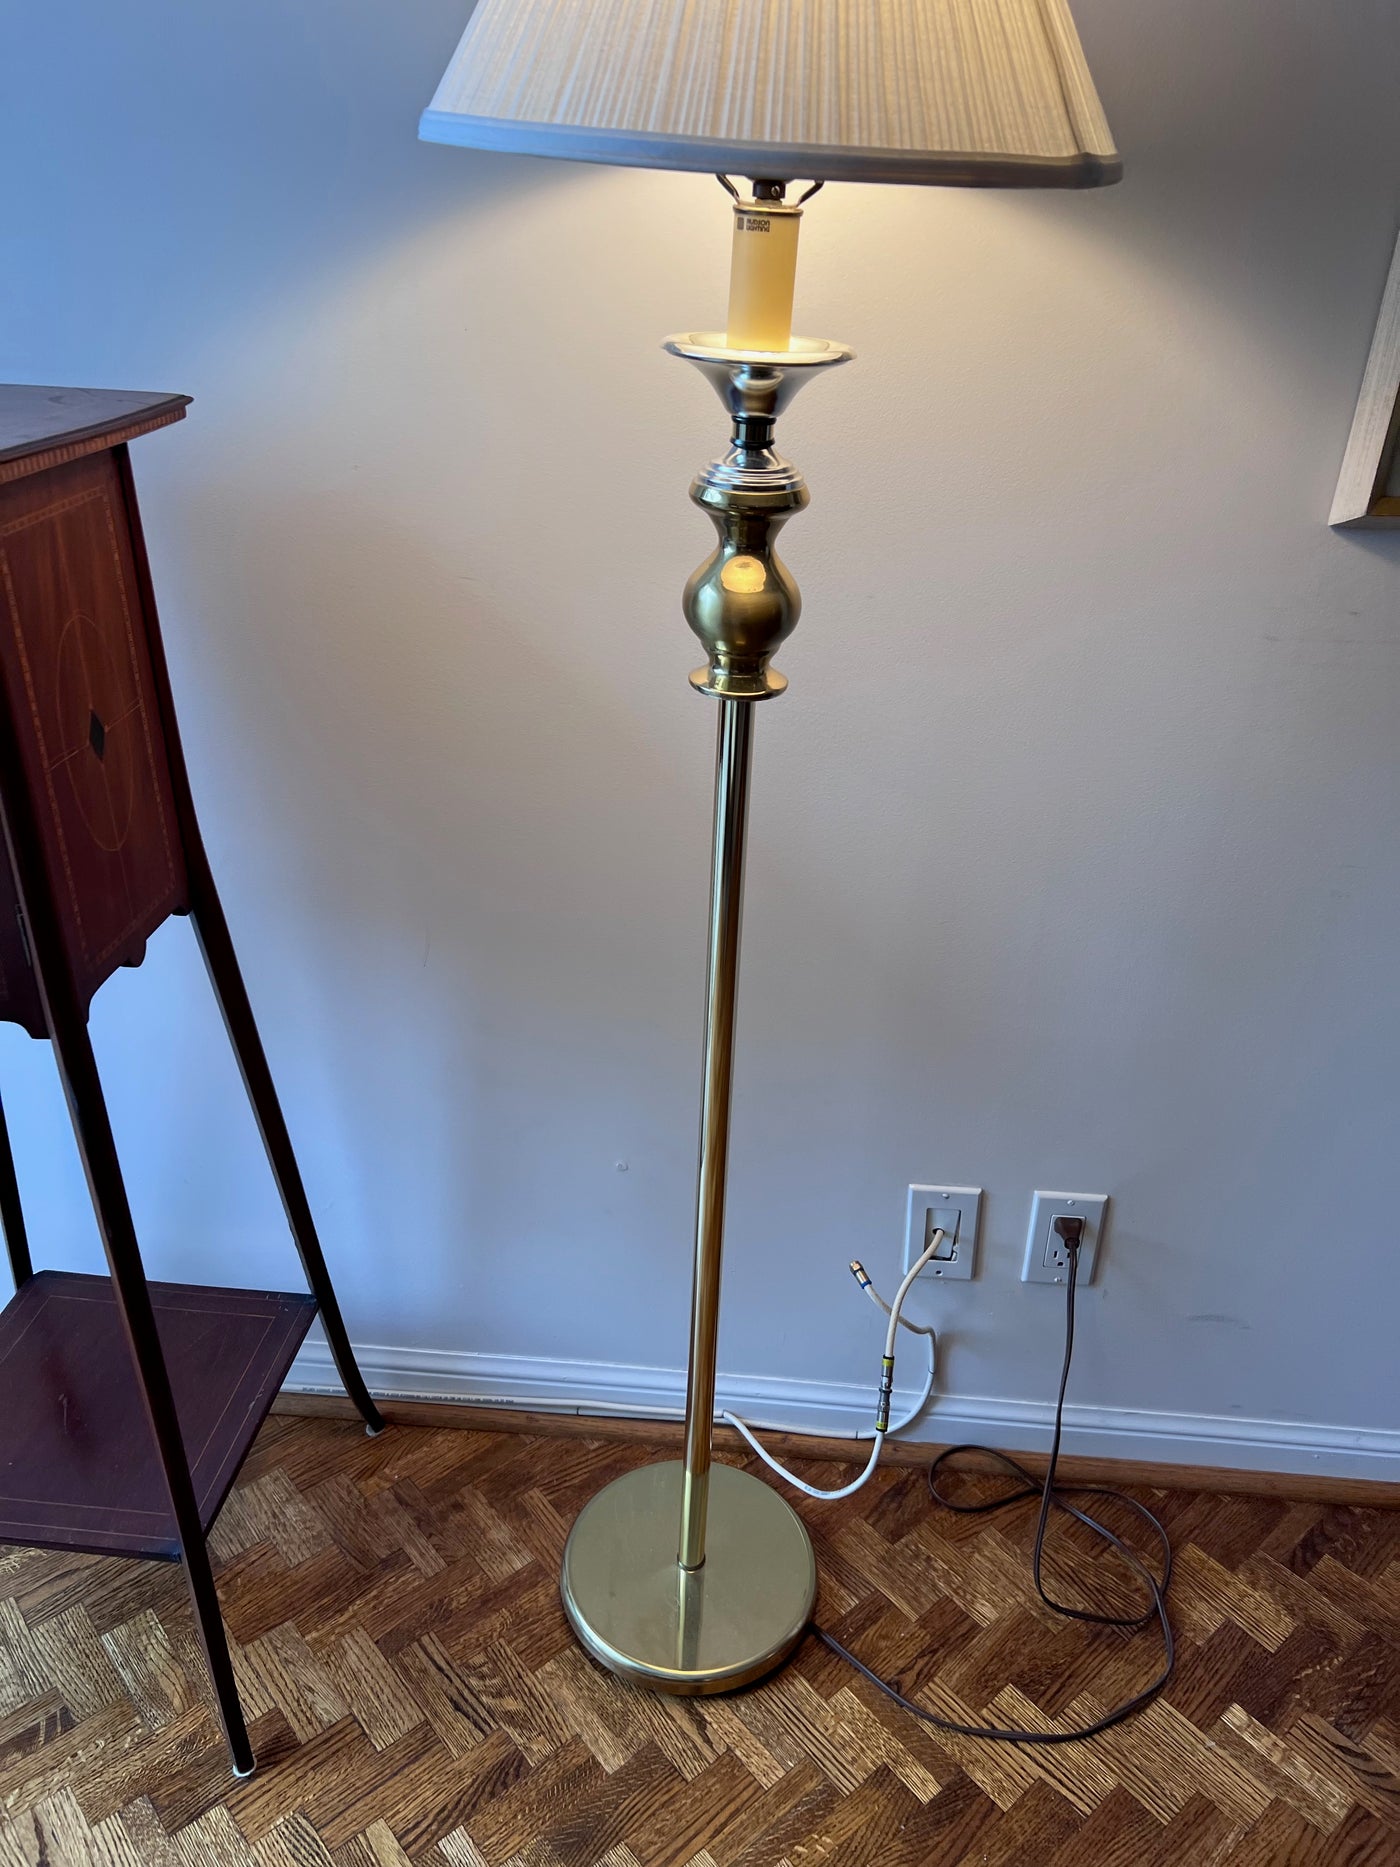 Vintage Brass 'Rudson Lighting' Floor Lamp – Sell My Stuff Canada -  Canada's Content and Estate Sale Specialists